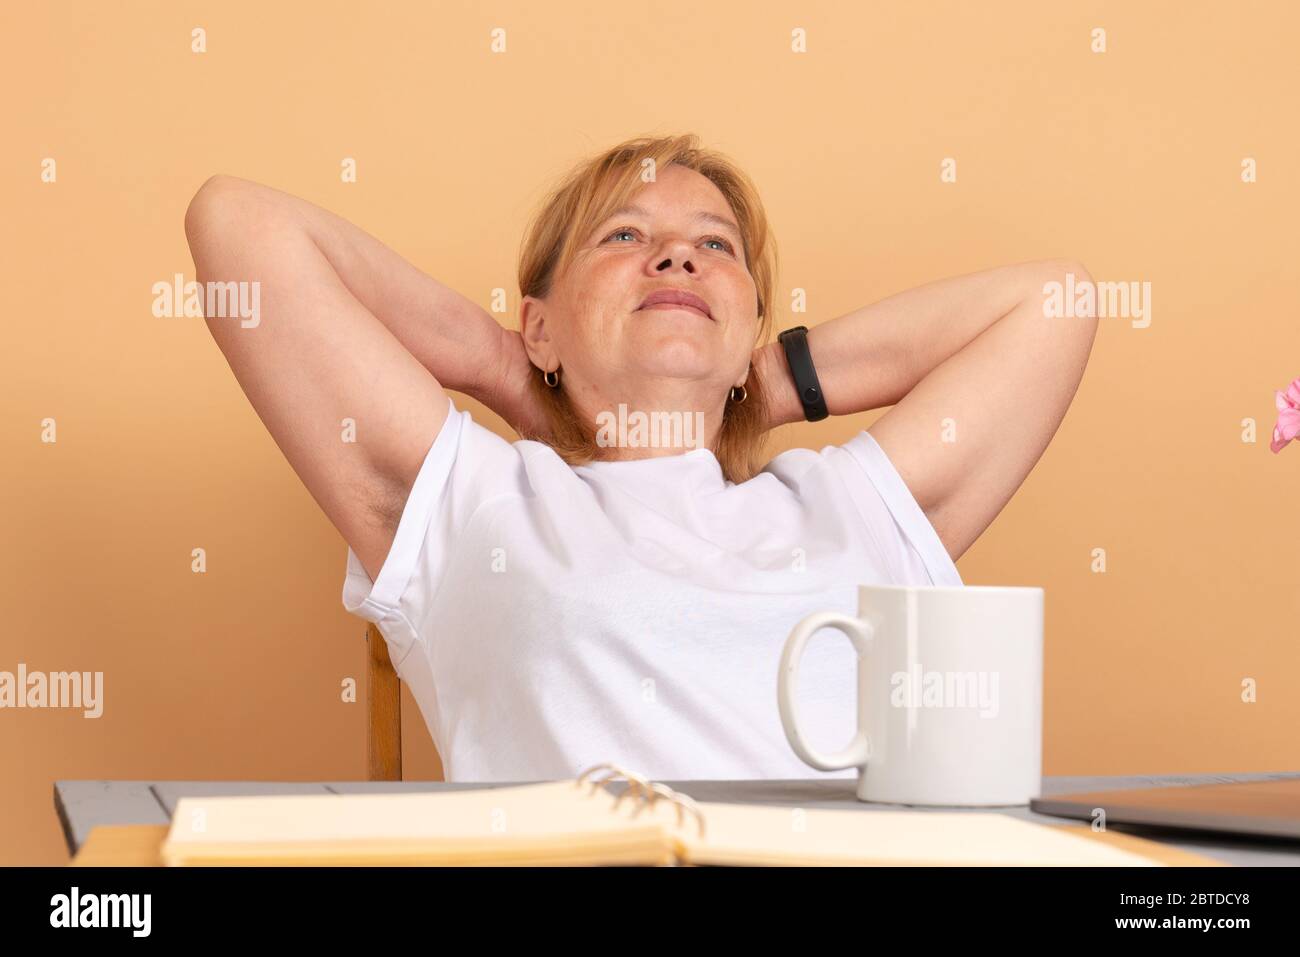 Middle age woman in white t-shirt sitting at the table, holds her hands behinde her head and shows hairy unshaven female armpits Stock Photo